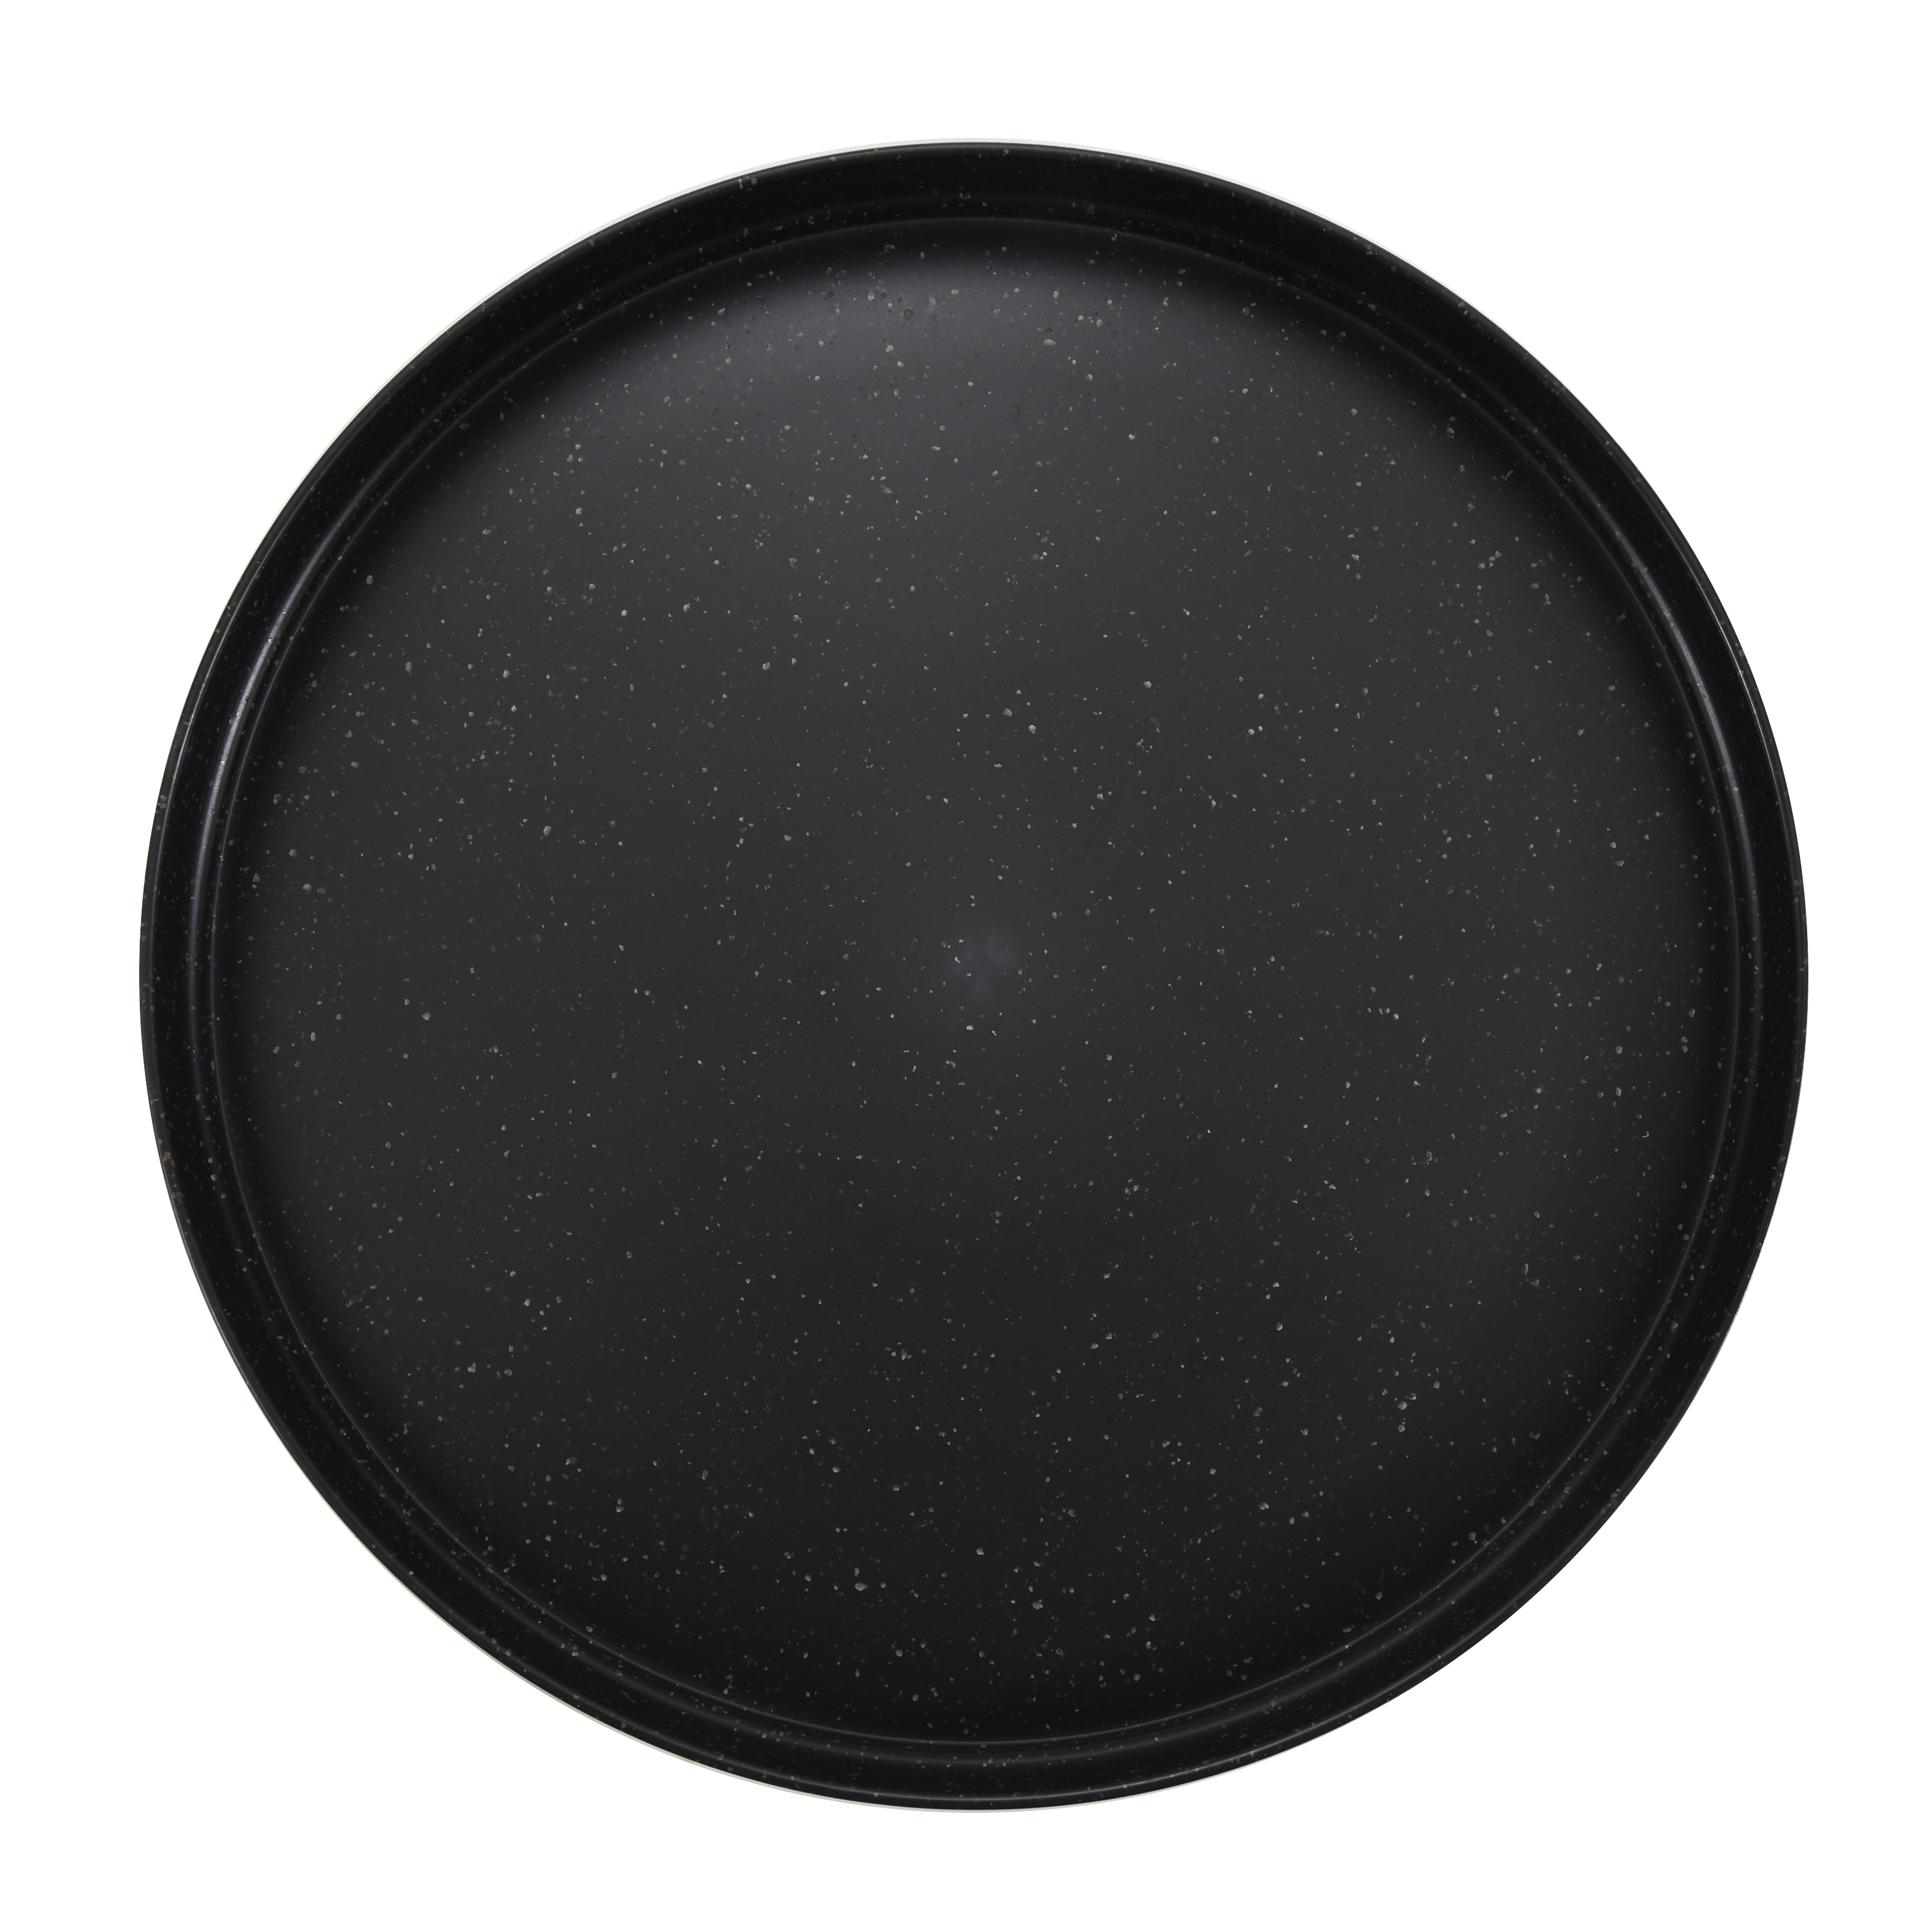 Mainstays 10-Inch Eco-Friendly Recycled Plastic Dinner Plate, Black - image 1 of 12